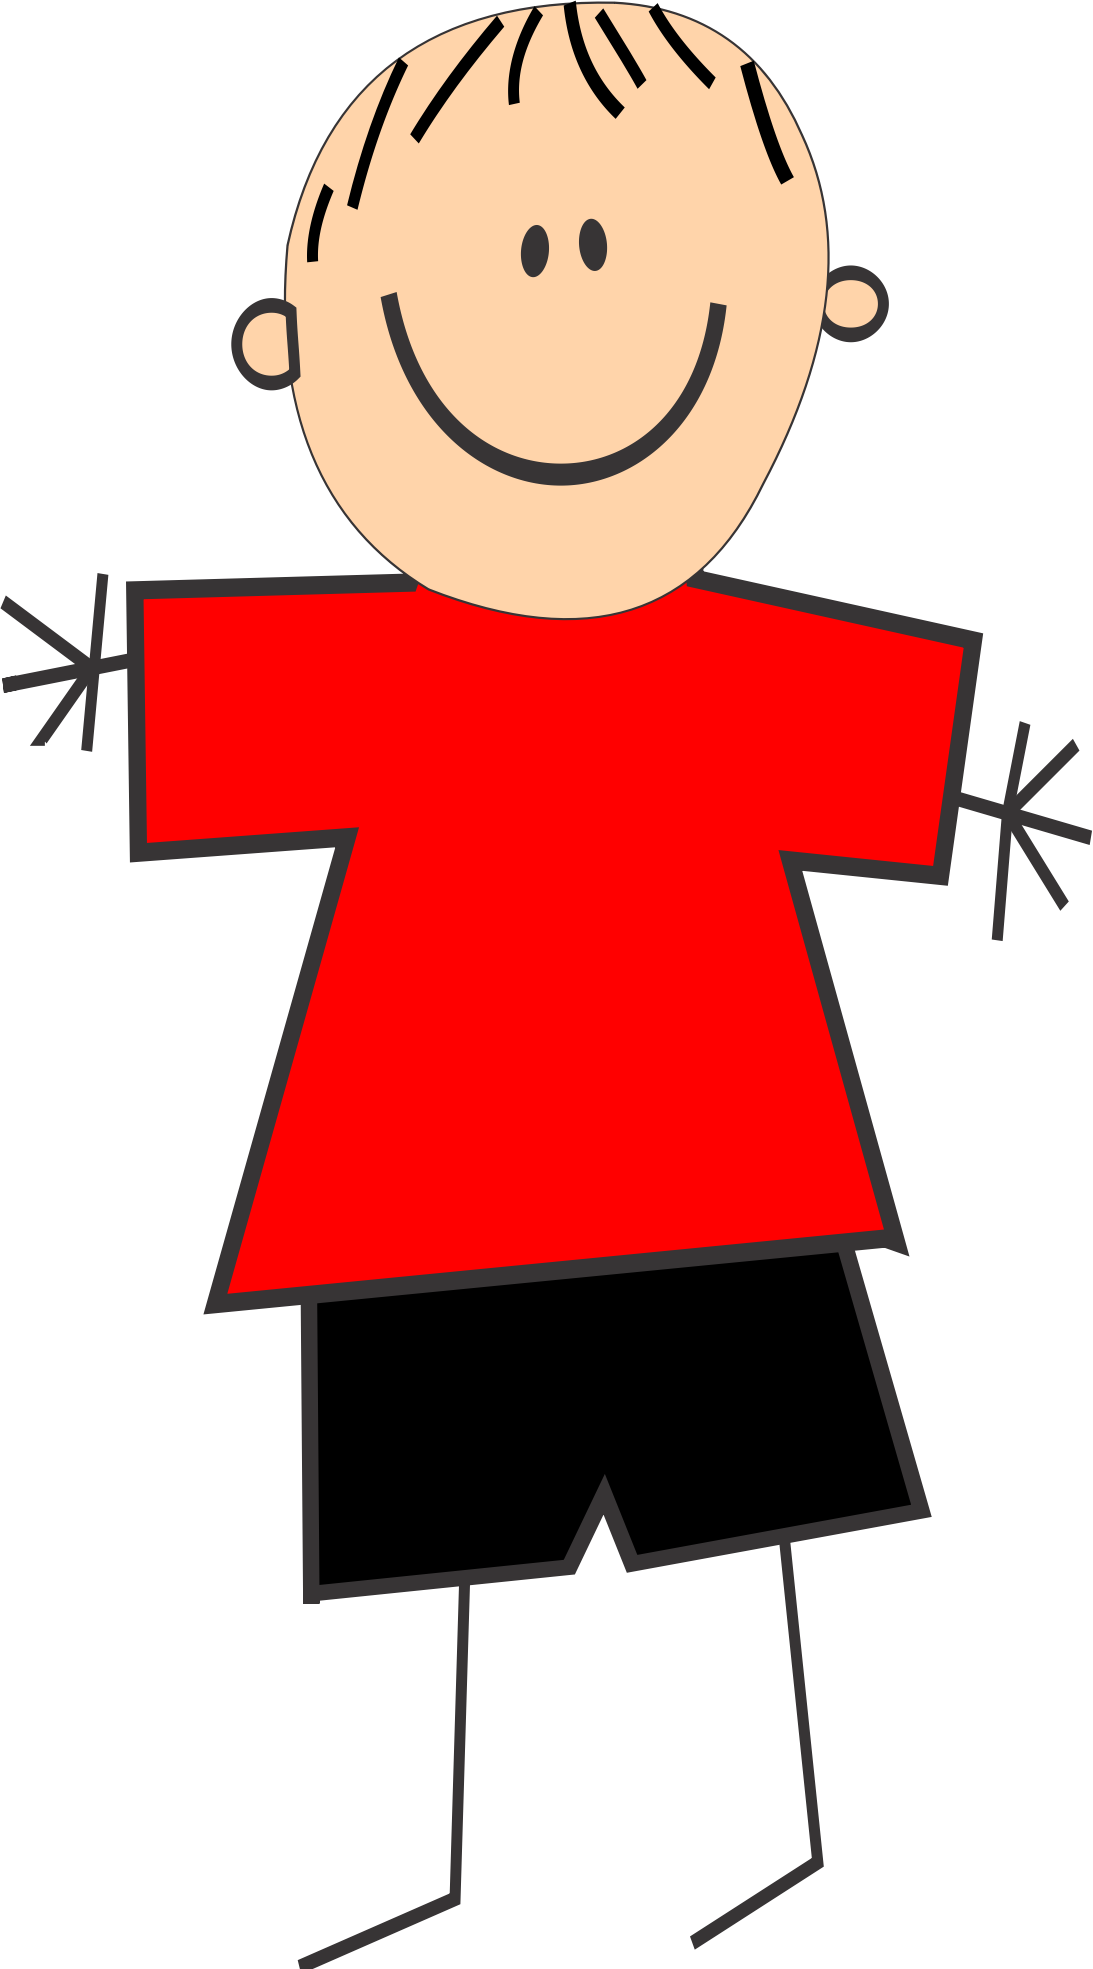 Boy With Red Shirt Openclipart | vlr.eng.br